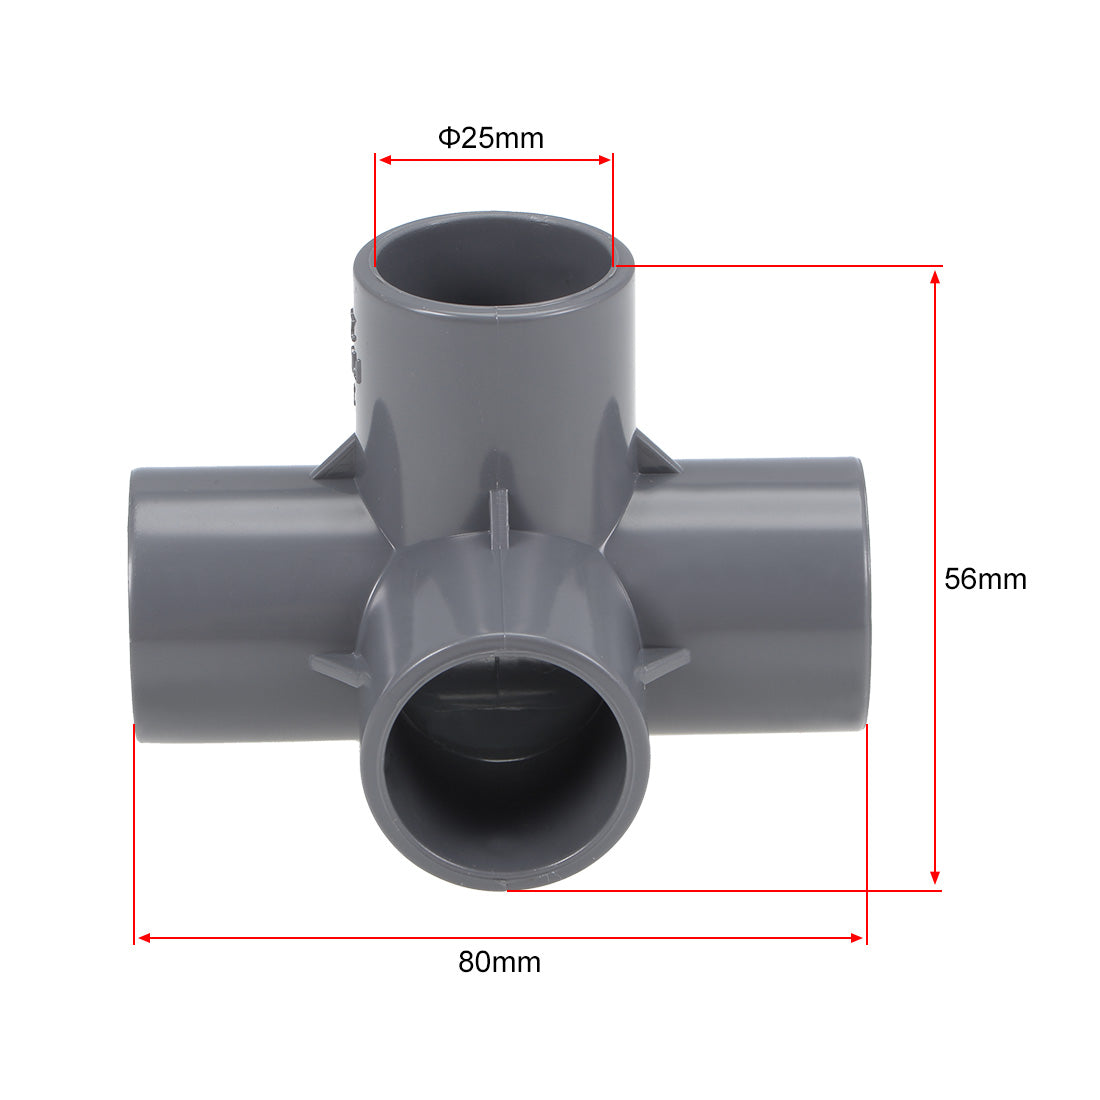 uxcell Uxcell 4 Way 25mm Tee Metric PVC Fitting Elbow - PVC Furniture - PVC Elbow Fittings Gray 5Pcs